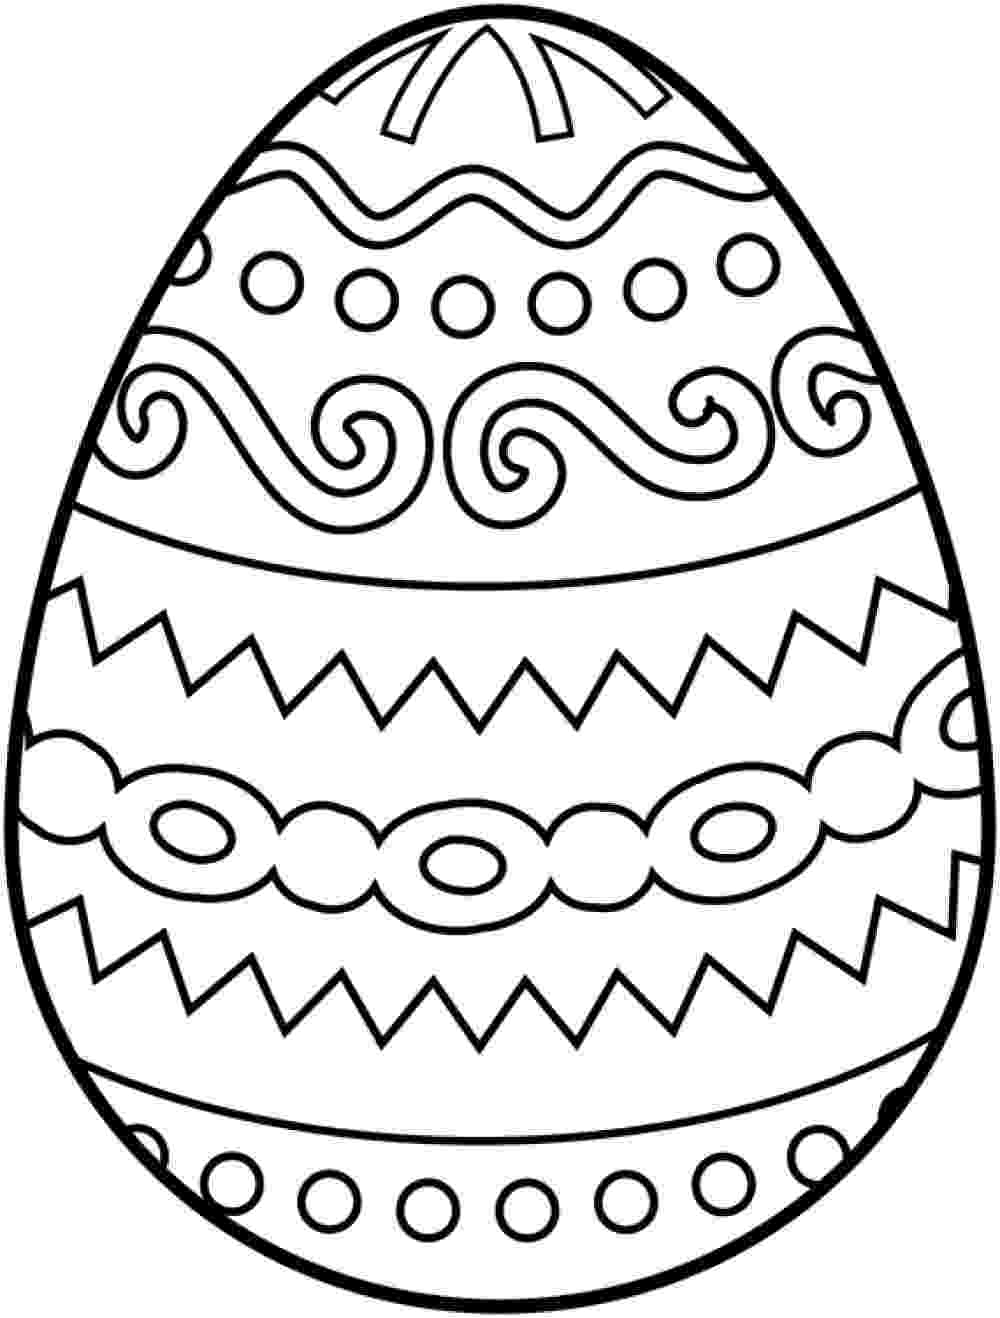 colouring picture easter egg free printable easter egg coloring pages for kids picture egg colouring easter 